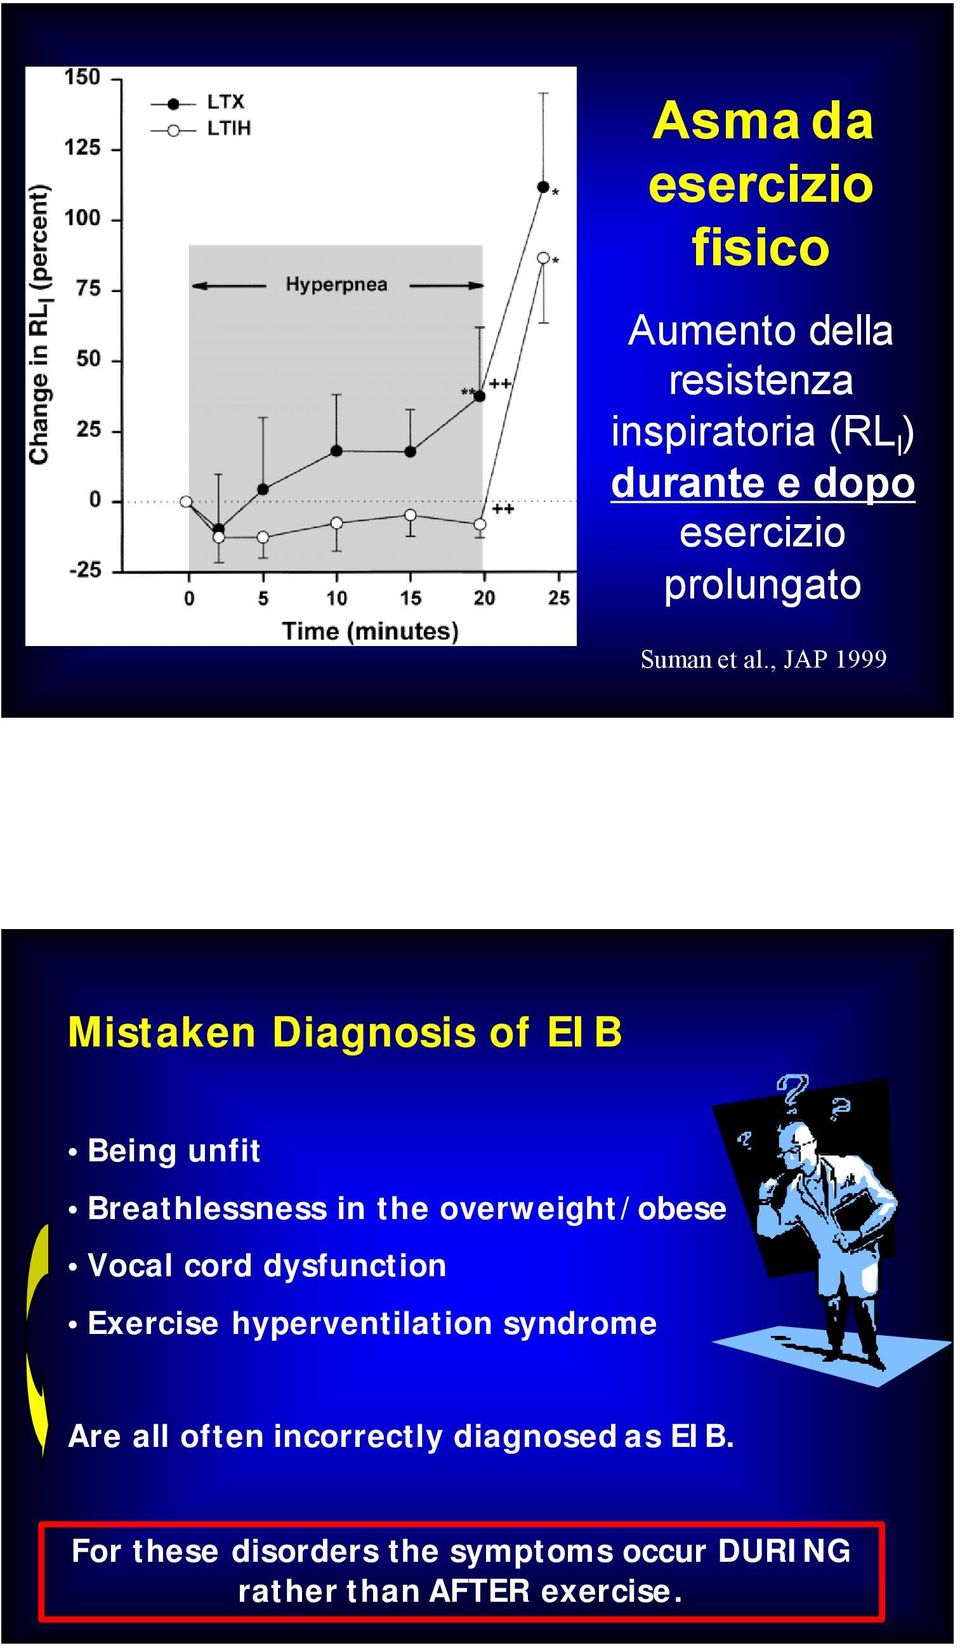 , JAP 1999 Mistaken Diagnosis of EIB Being unfit Breathlessness in the overweight/obese Vocal